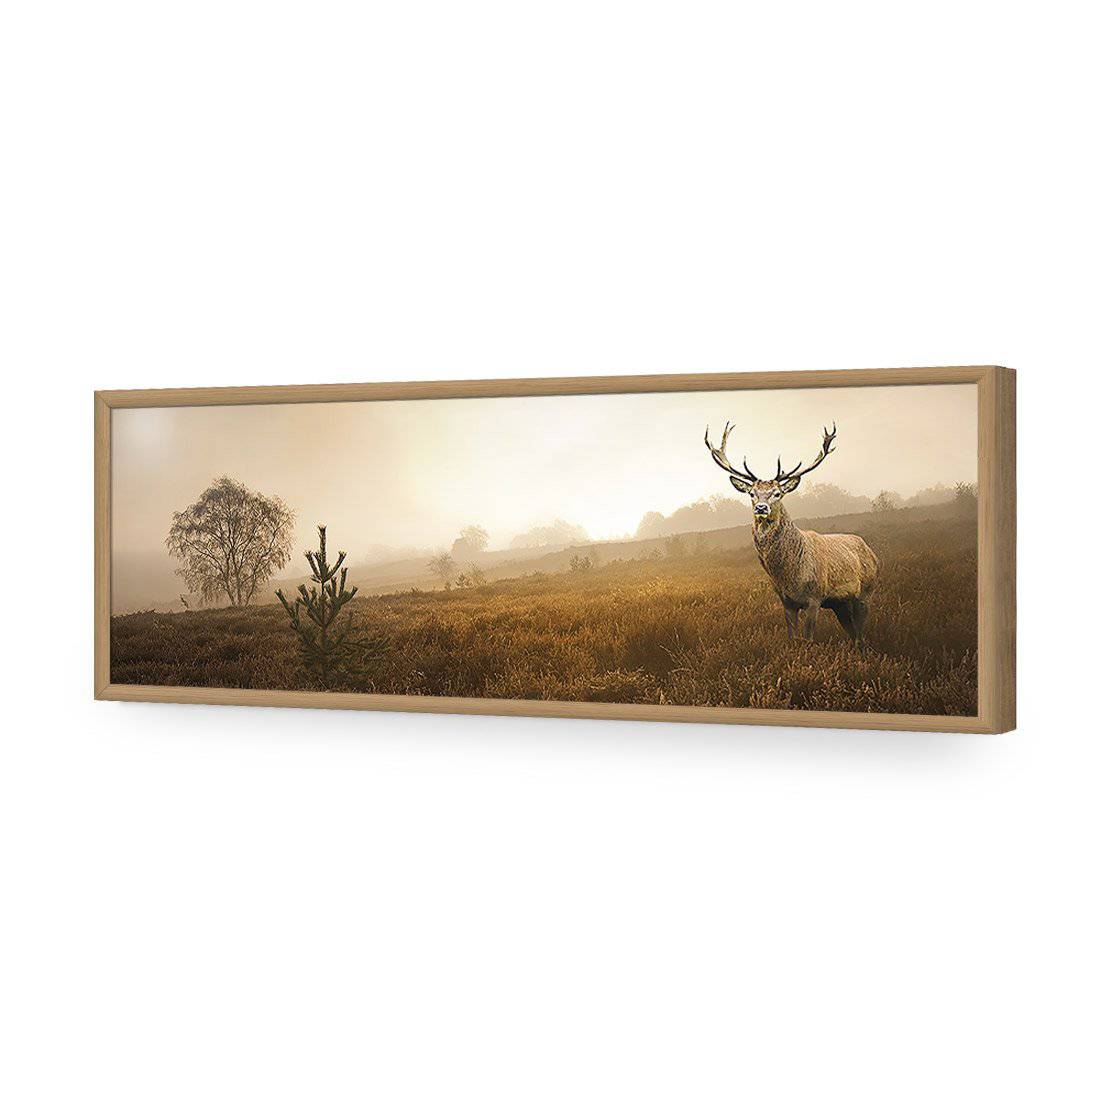 Morning Stag, Long-Acrylic-Wall Art Design-Without Border-Acrylic - Oak Frame-60x20cm-Wall Art Designs